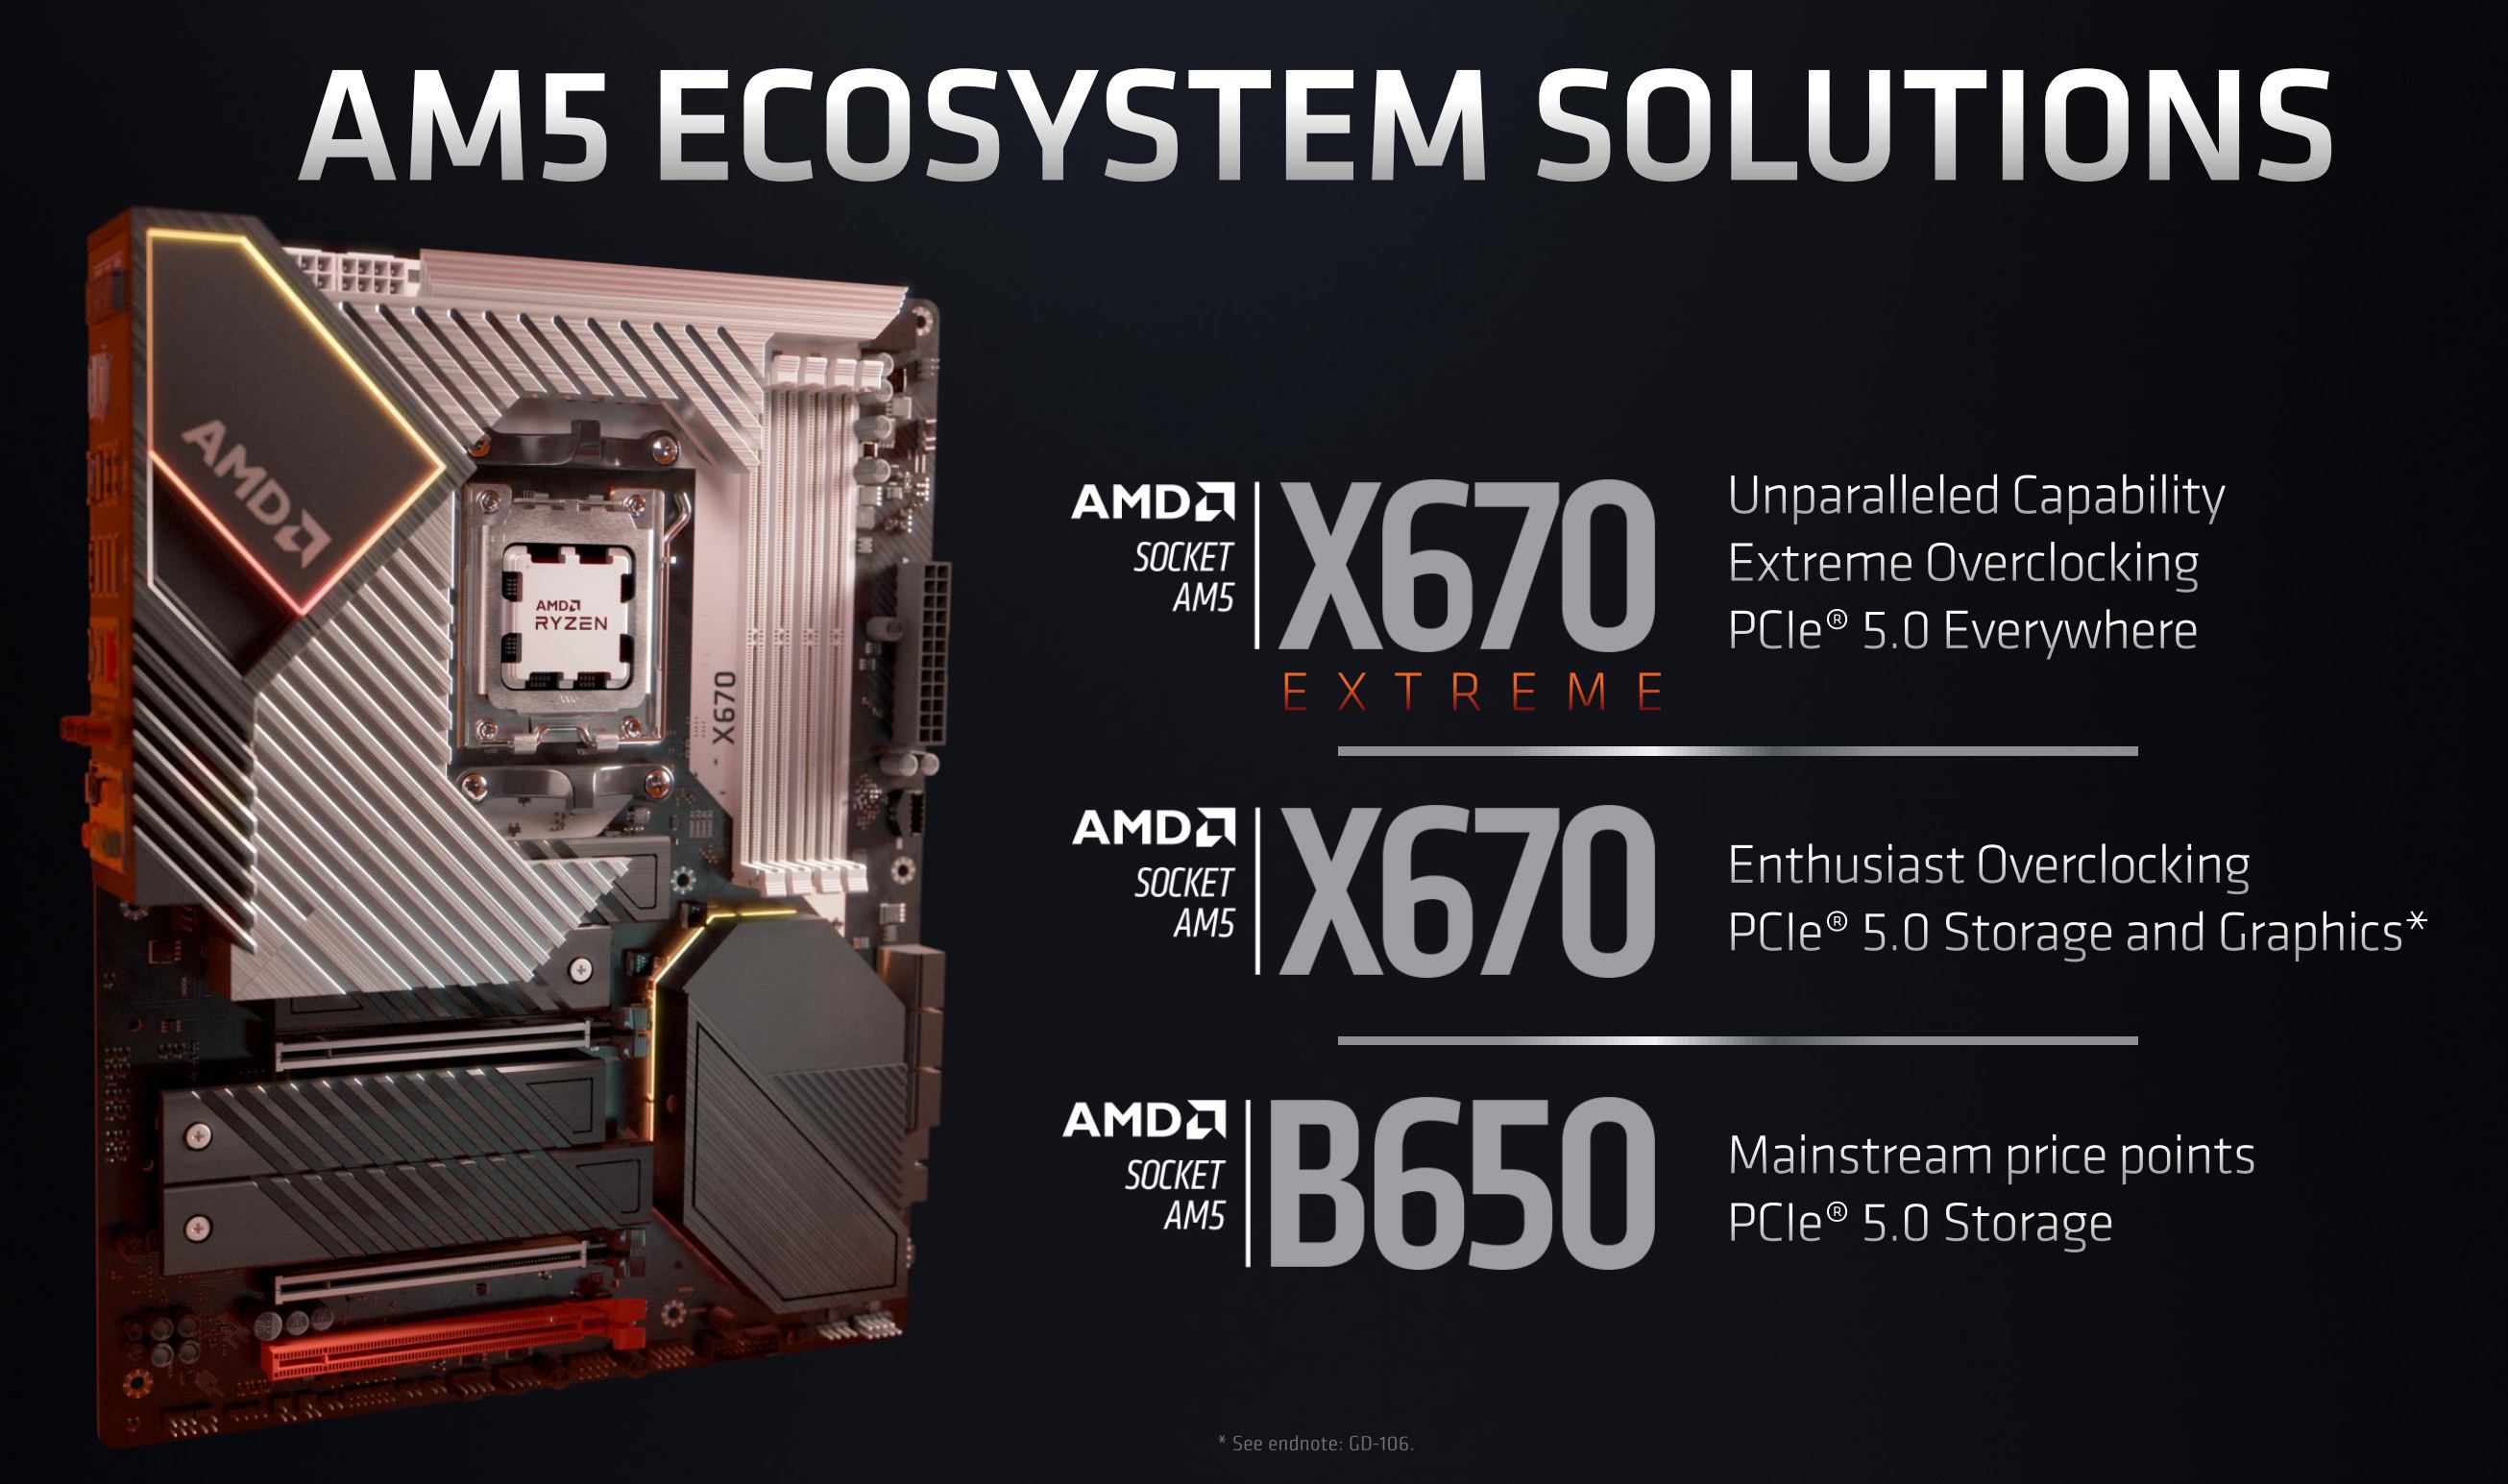 Aorus Gen4 7000s Premium SSD features bulky stacked cooler - Storage - News  